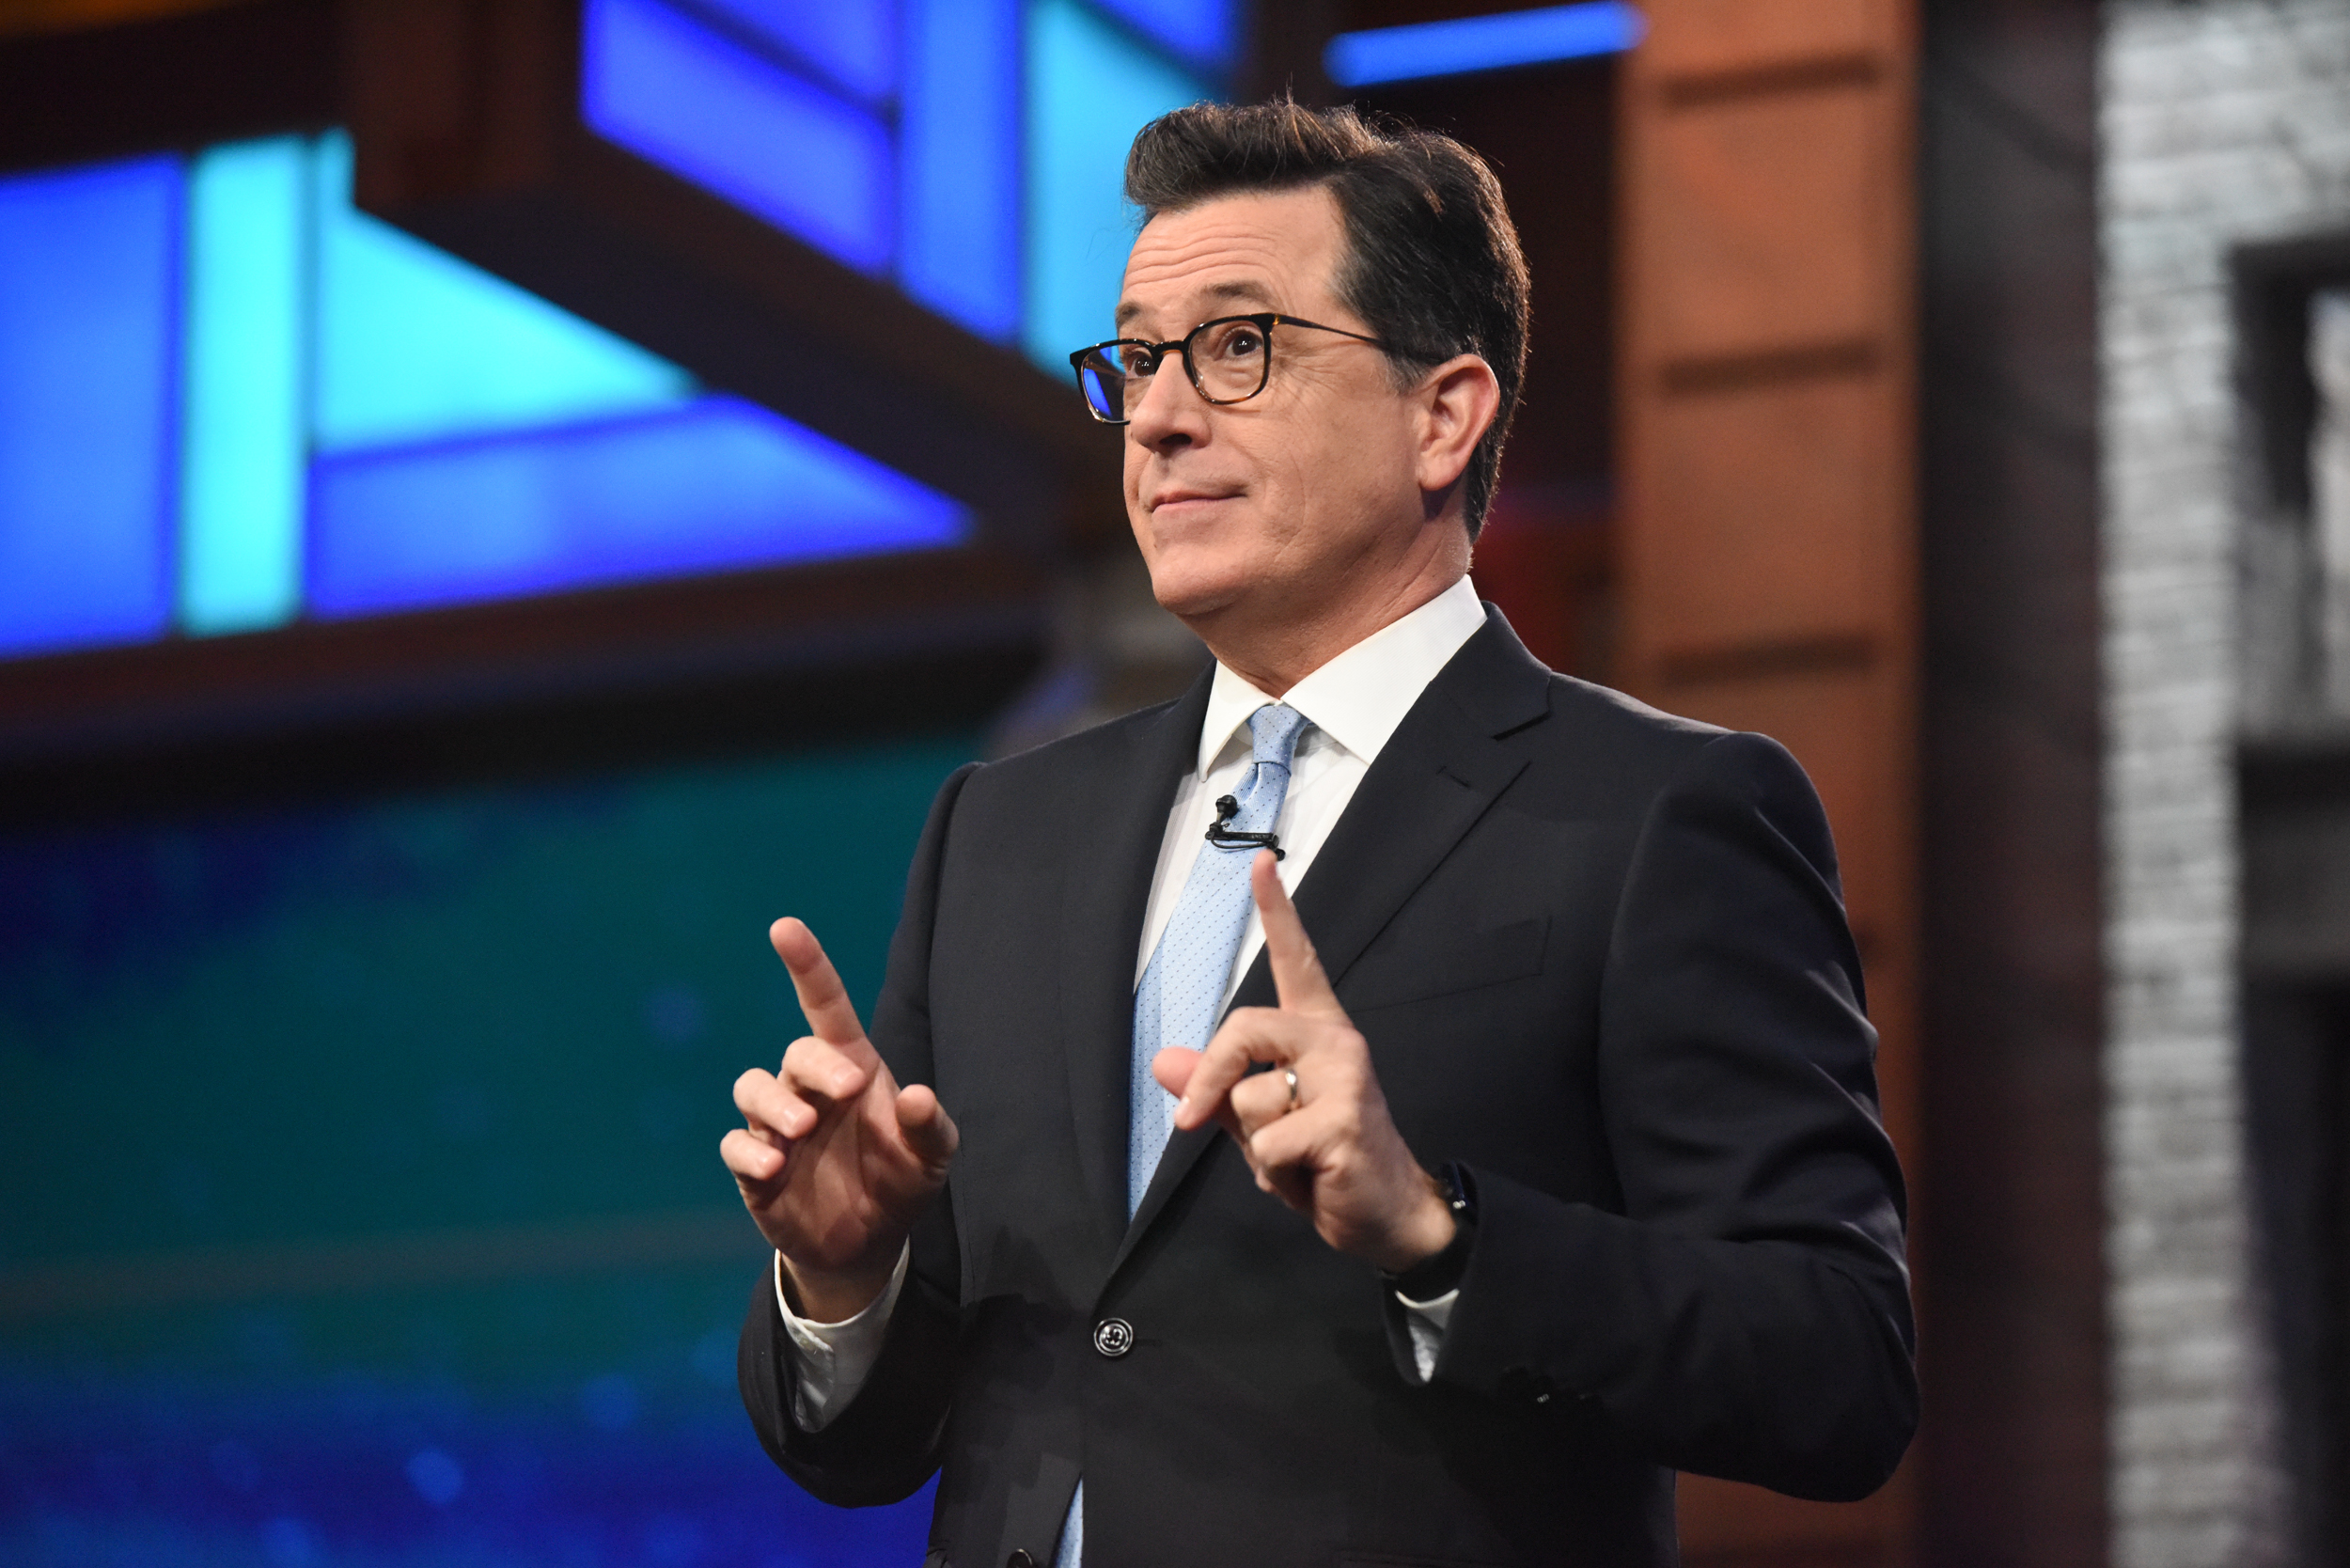 The Late Show with Stephen Colbert during the June 8, 2017 show. (Scott Kowalchyk—CBS/Getty Images)